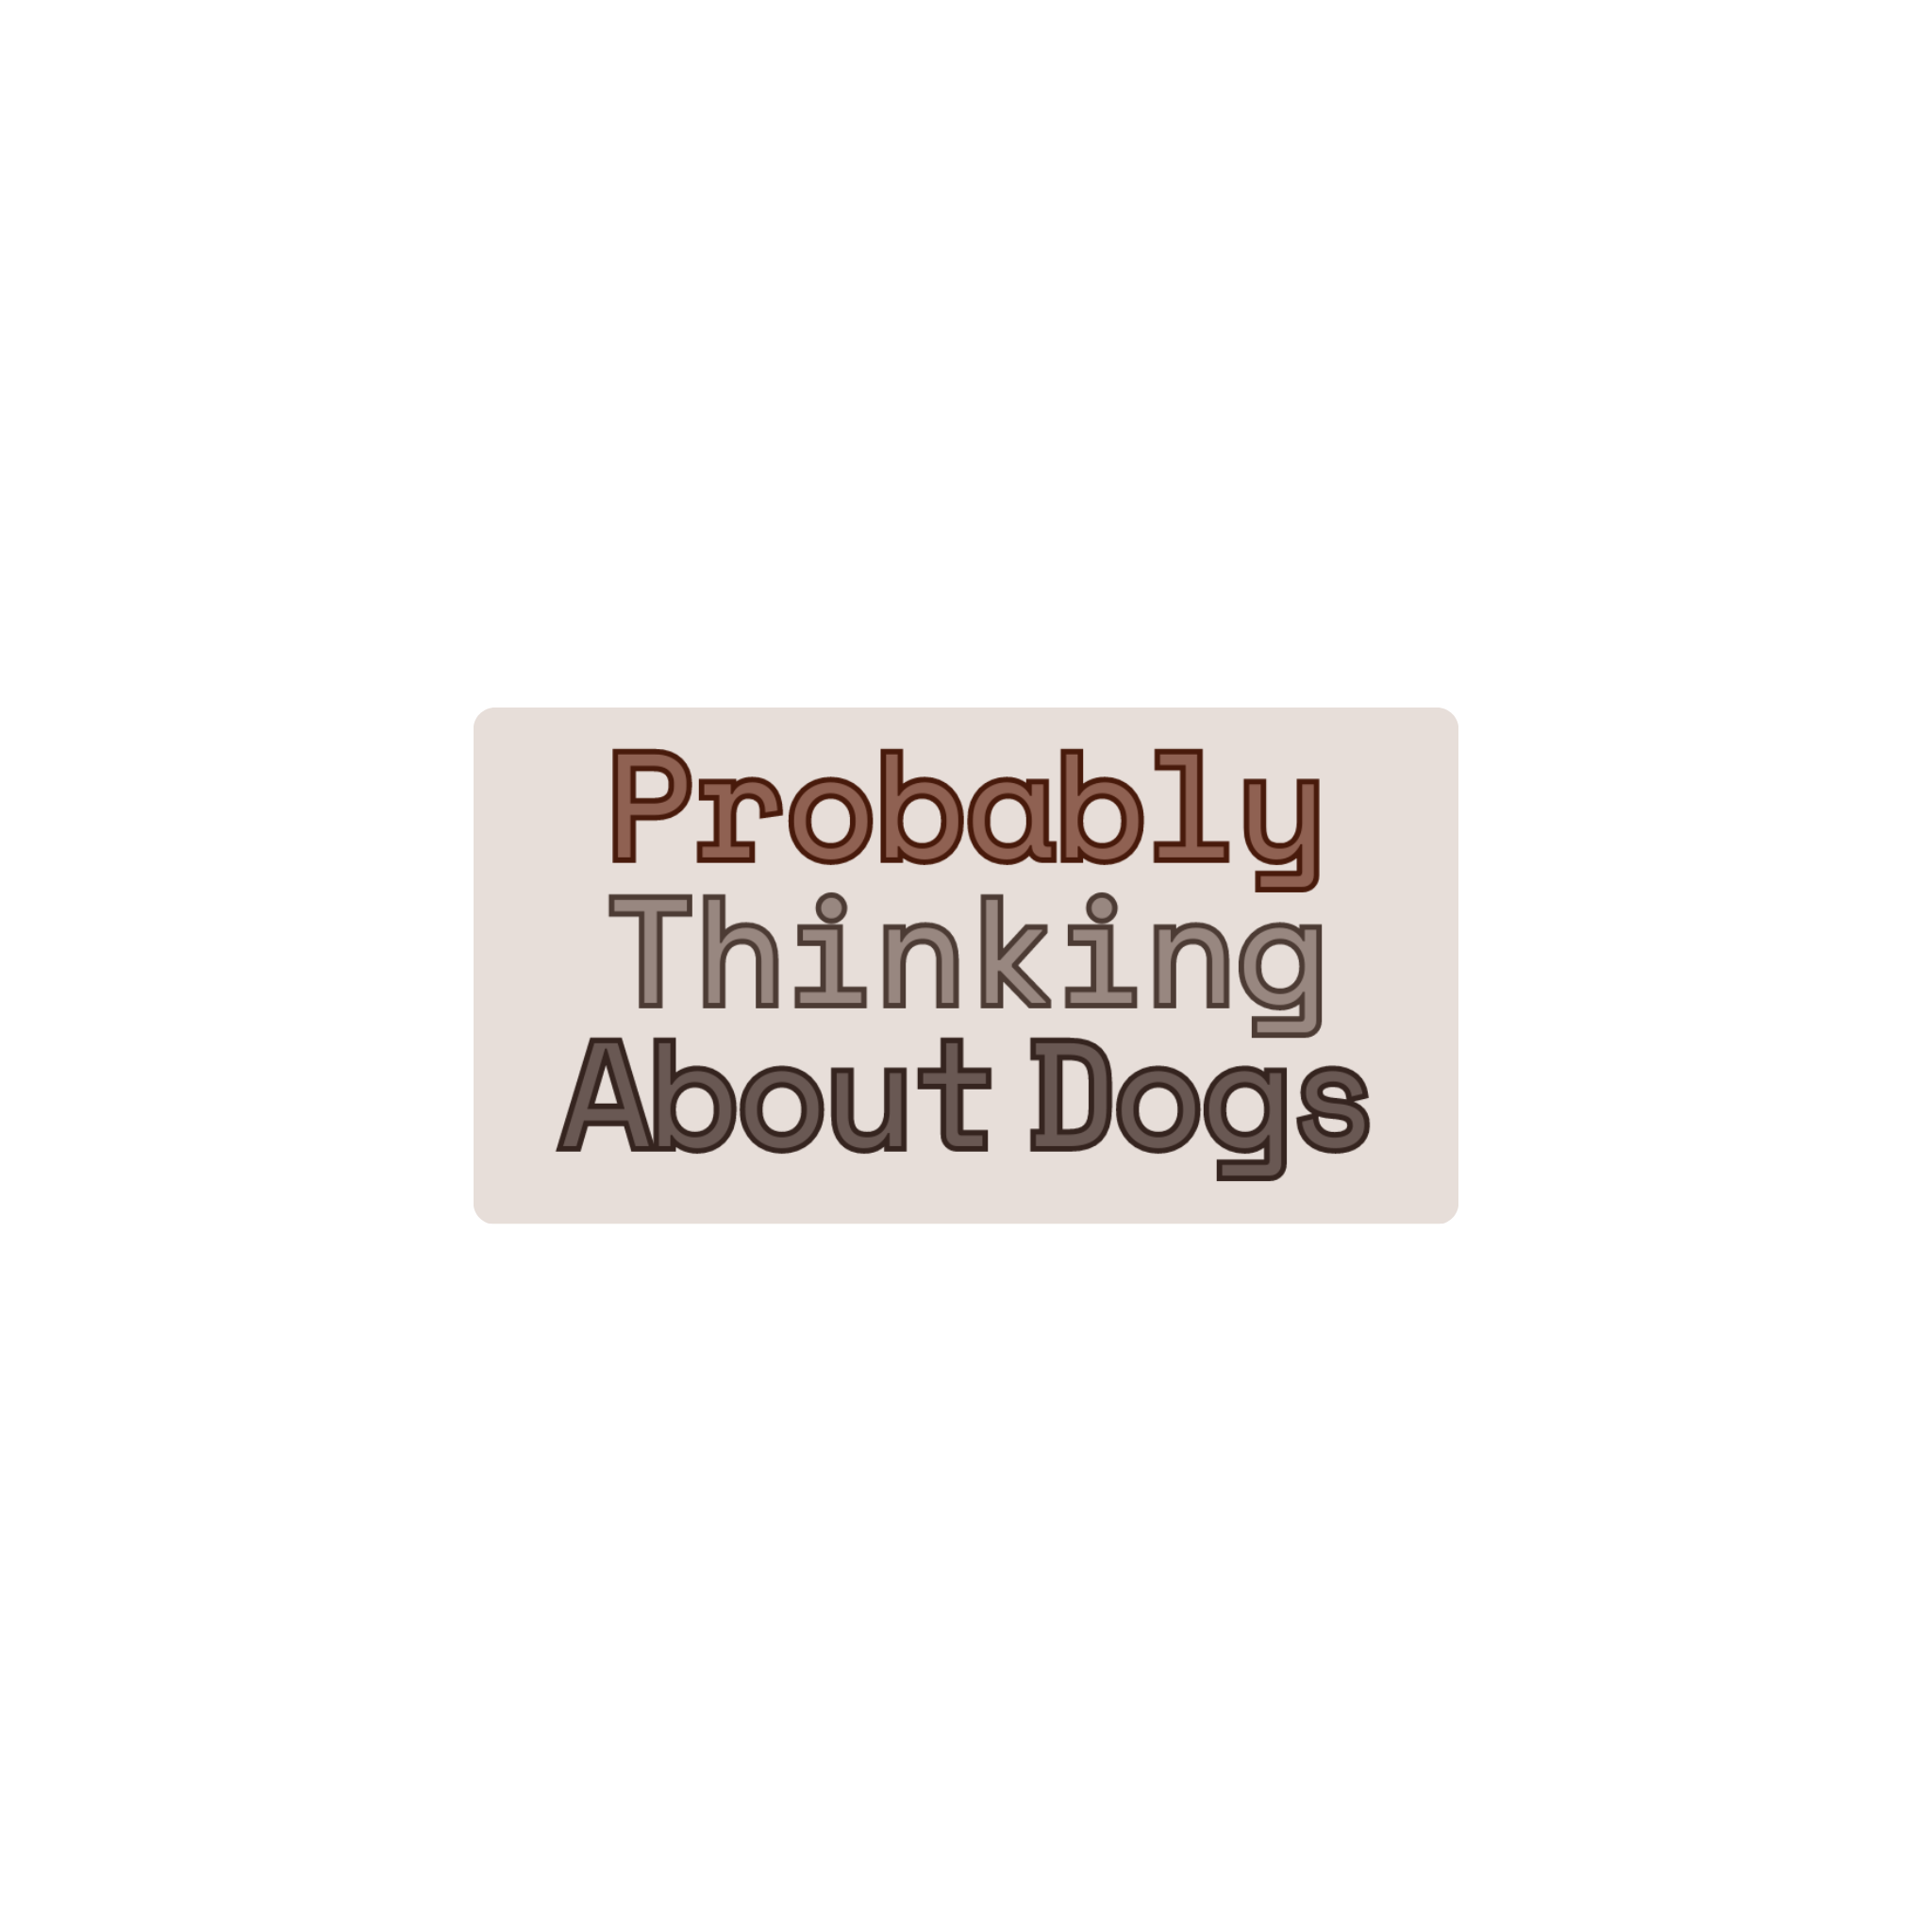 Probably Thinking About Dogs- Vinyl Sticker